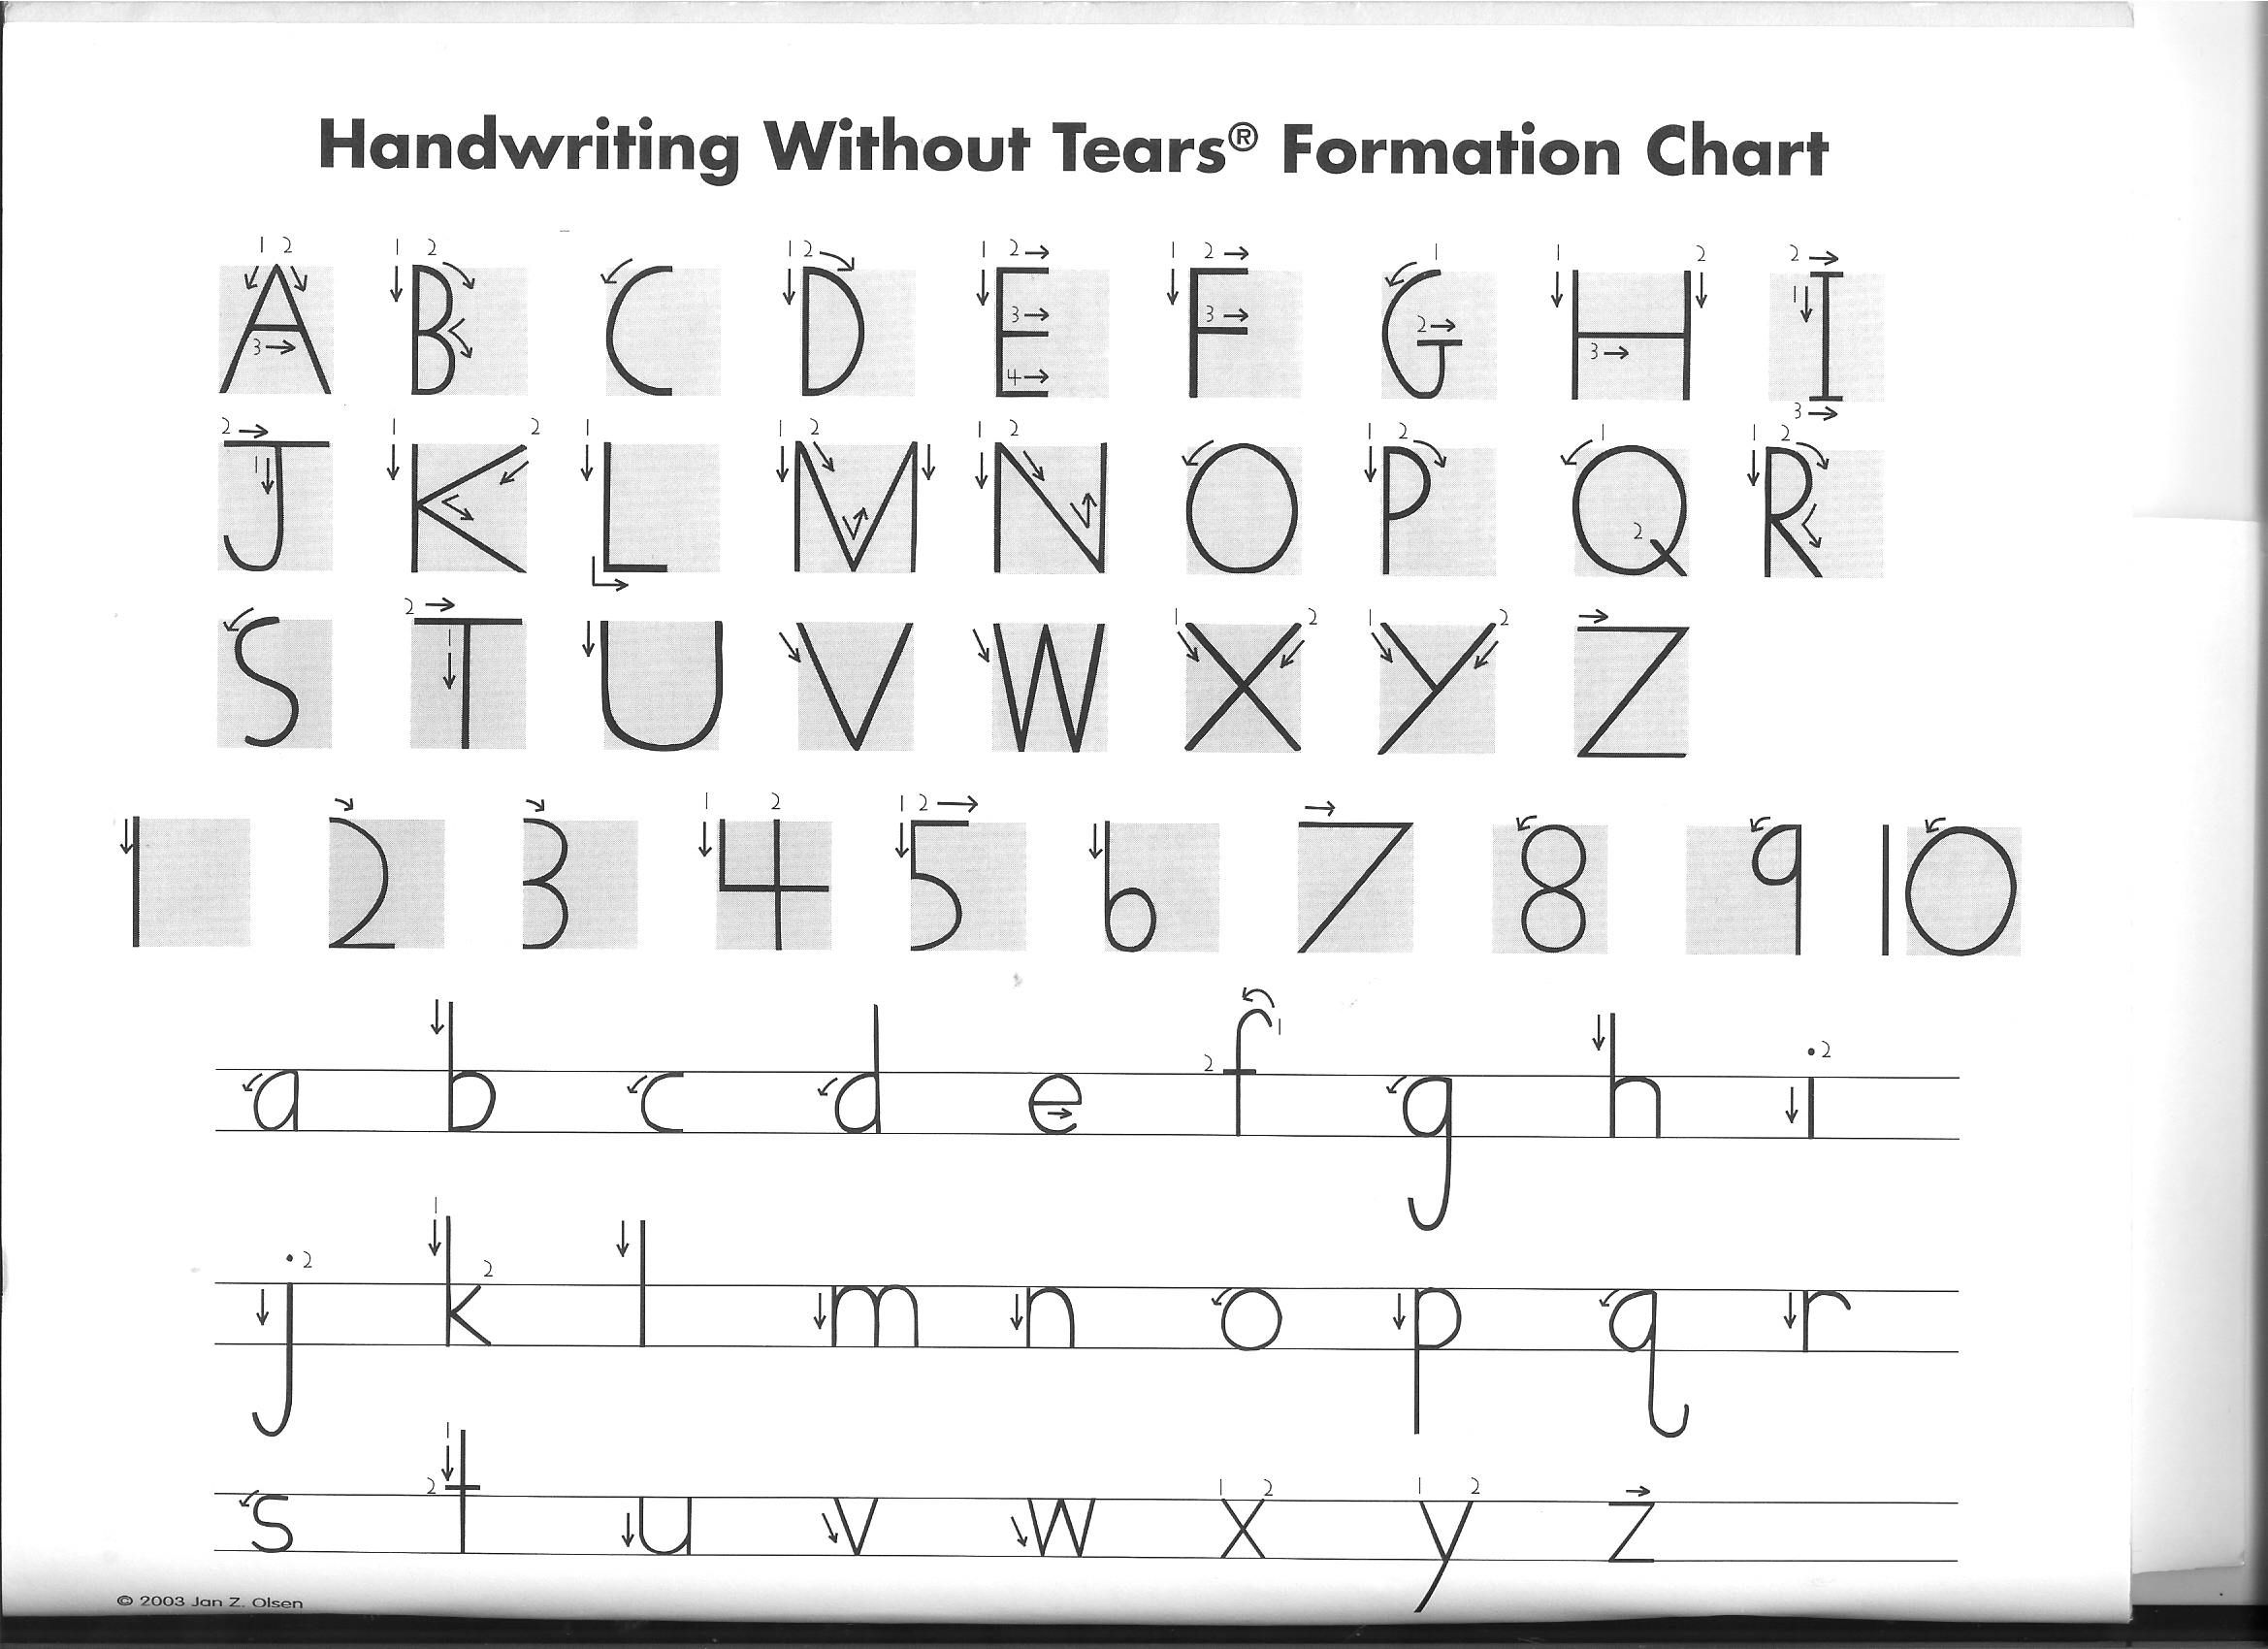 Handwriting Without Tears Letter Formation Image